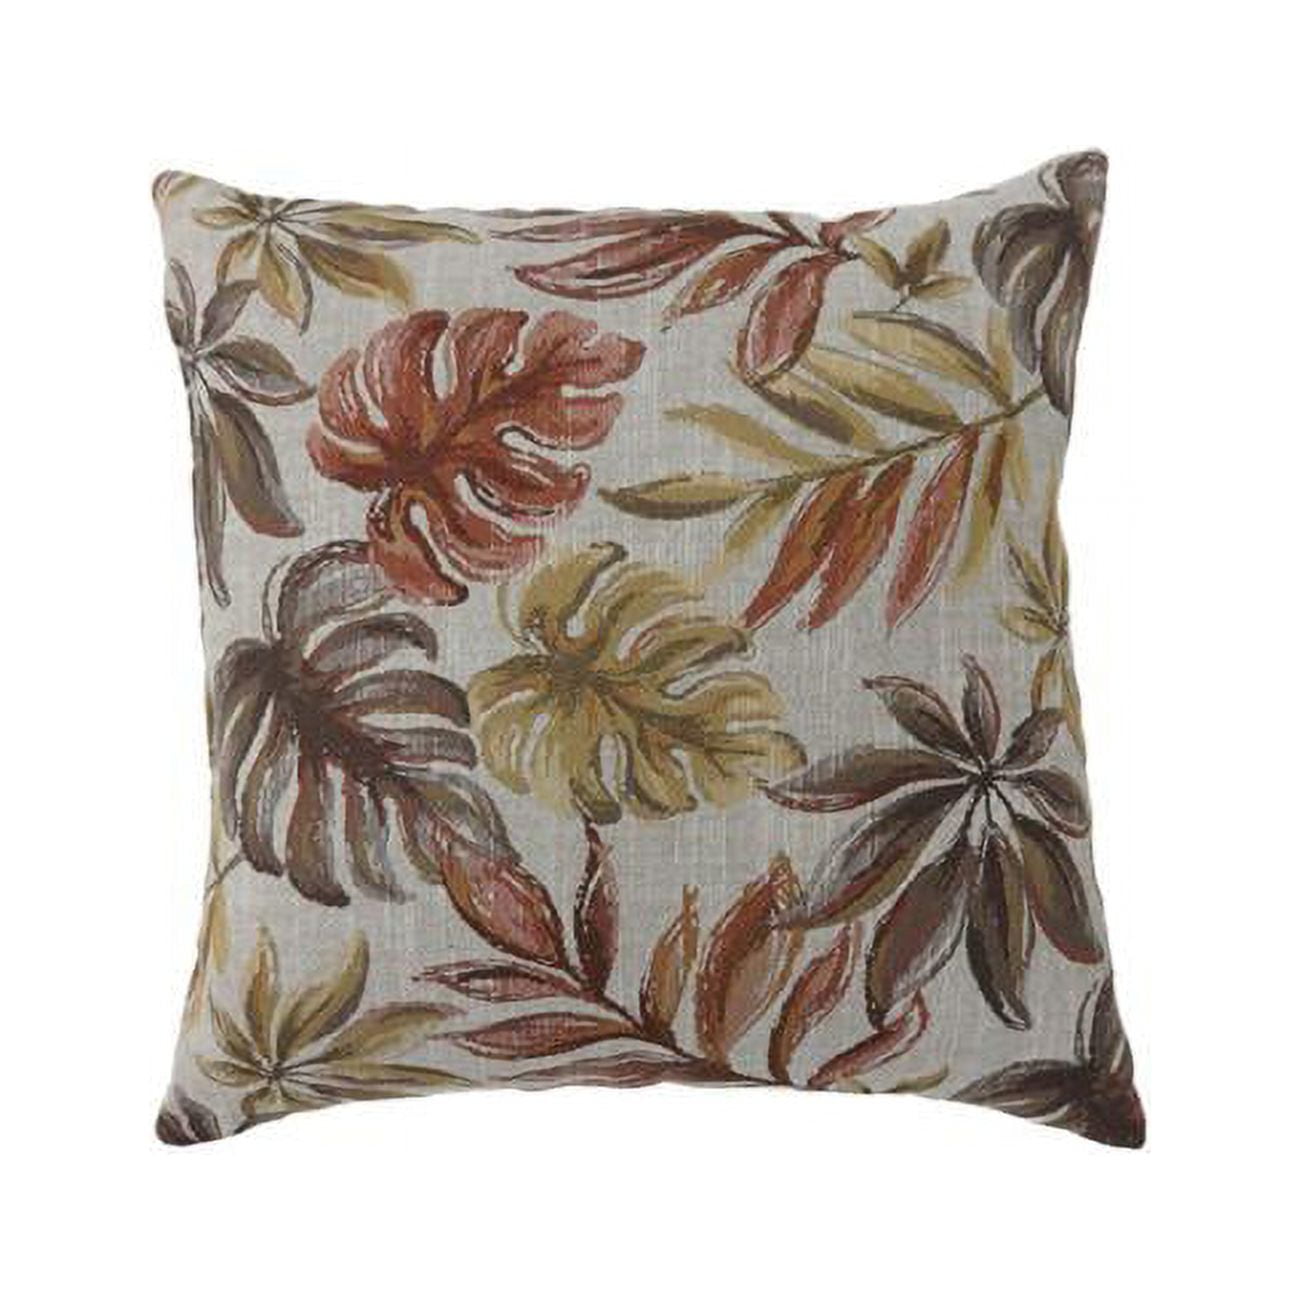 Picture of Benzara BM177974 Contemporary Style Leaf Designed Throw Pillows, Red - Set of 2 - 2 x 18 x 18 in.